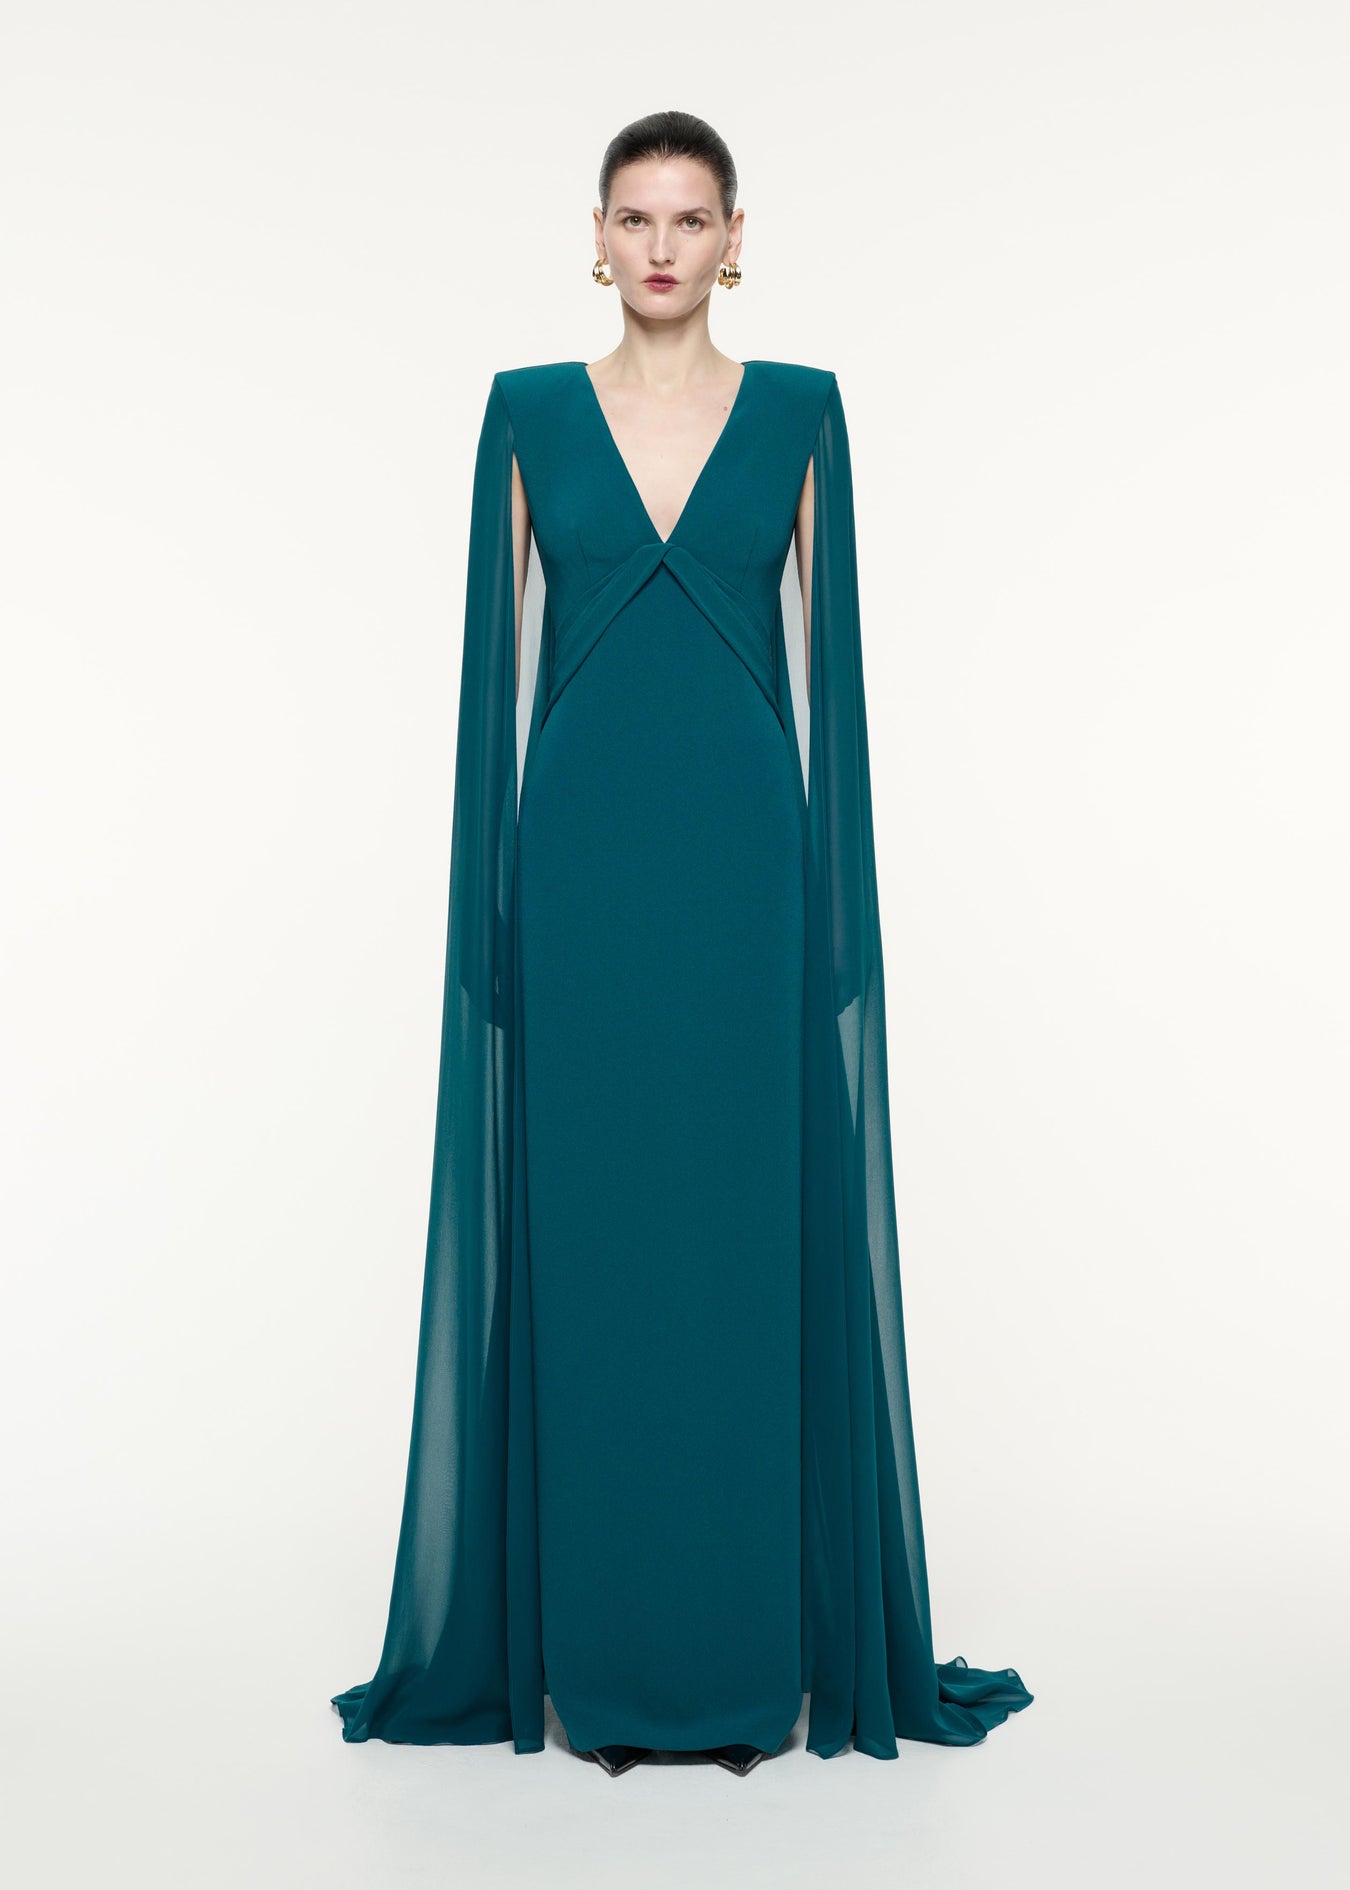 A front view image of a model wearing the Cape Sleeve Satin Crepe Gown in Green